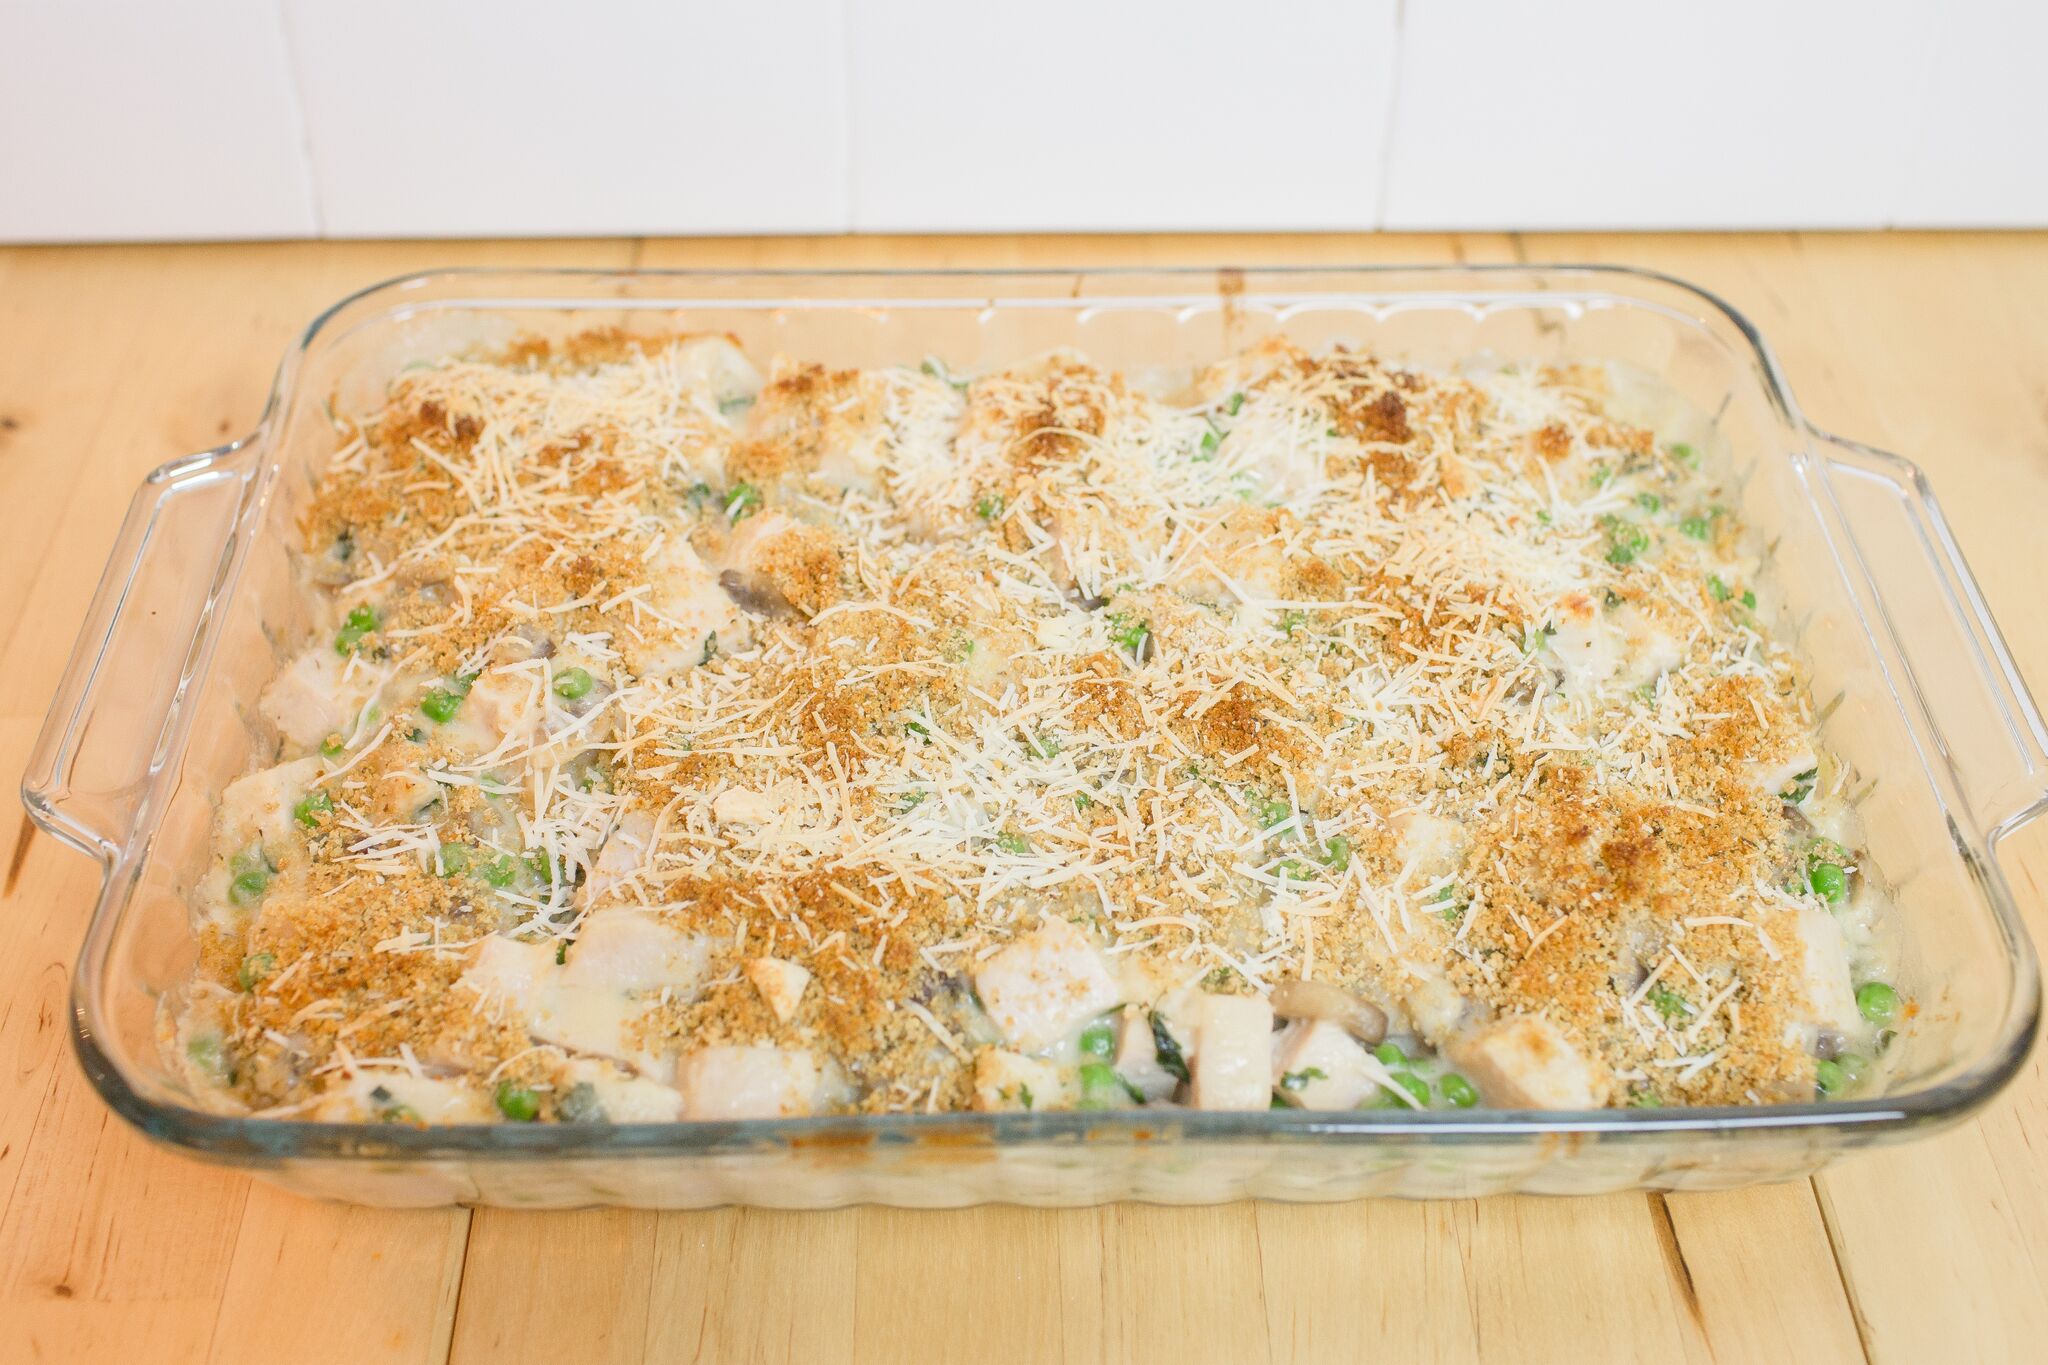 Got turkey leftovers? This Turkey Tetrazzini recipe is one creamy, comforting, and easy to make casserole recipe that will delight your whole family! 